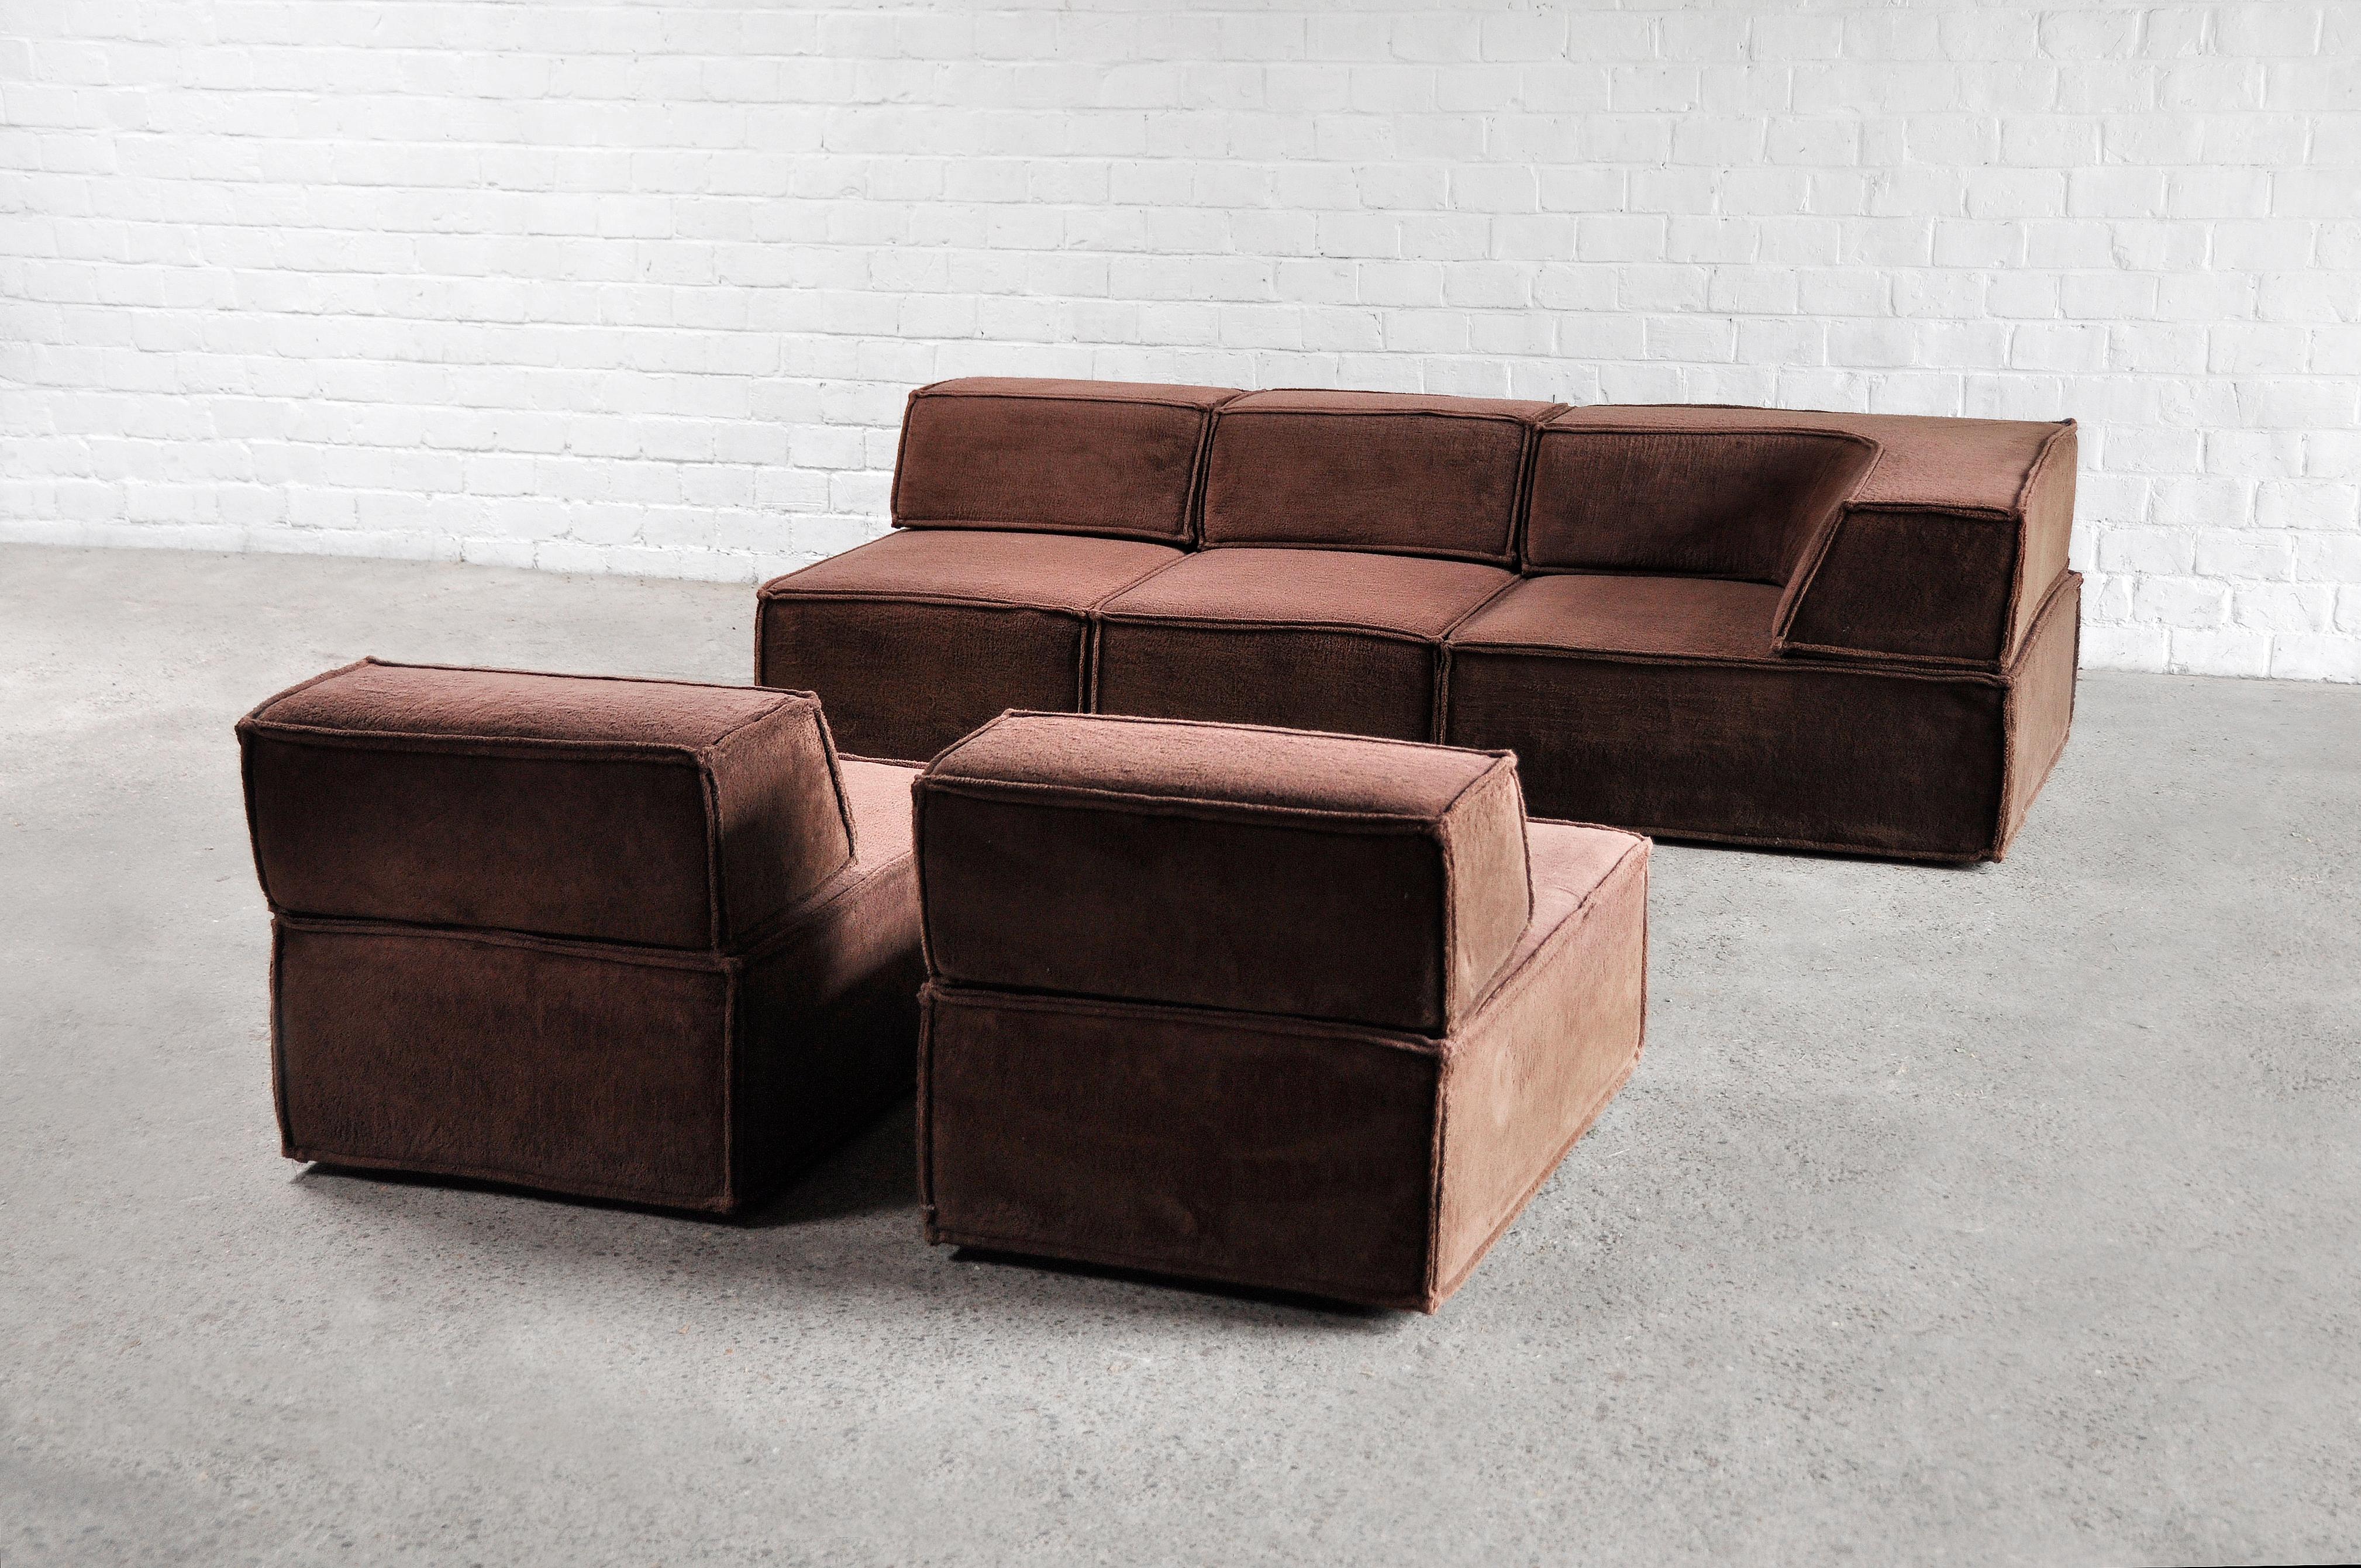 Vintage Modular 'Trio' Sofa from COR In Brown Teddy, 1973 1